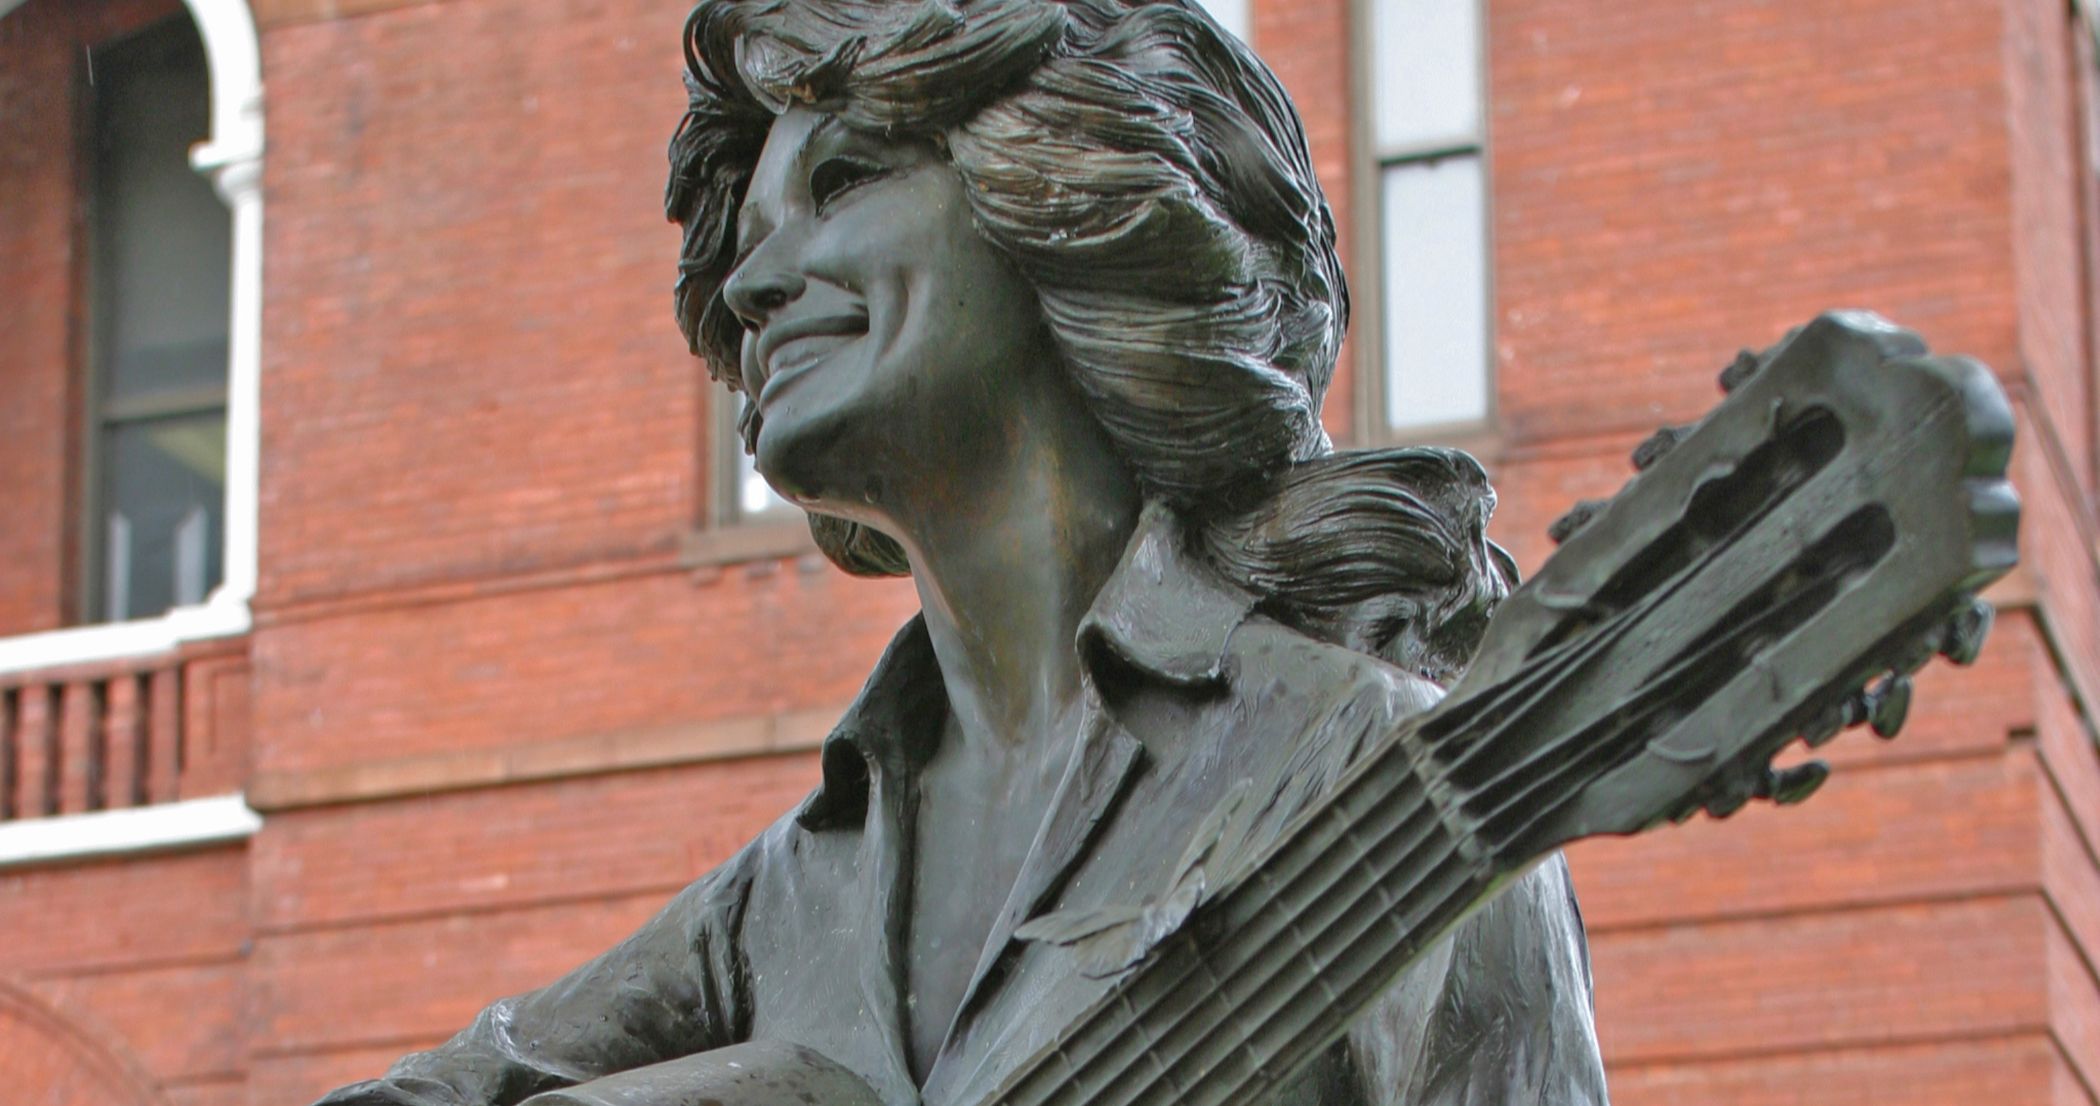 Dolly Parton Says No Thanks for Now to Statue of Her at Tennessee Capital